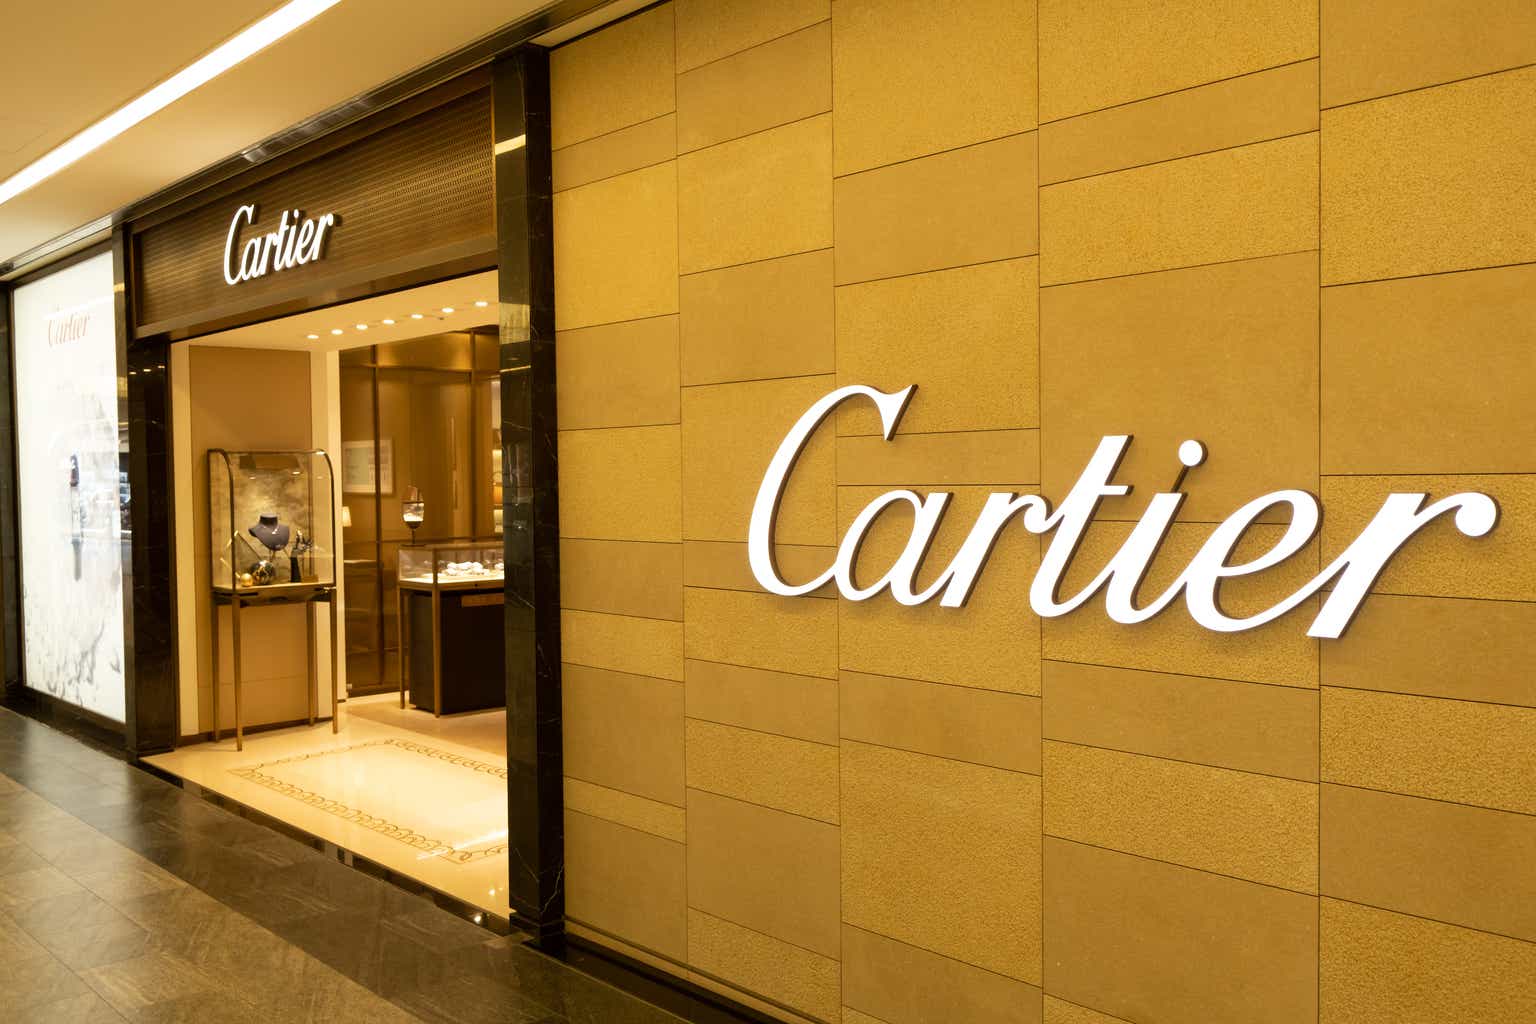 Tough time for luxury group Richemont as profit halved